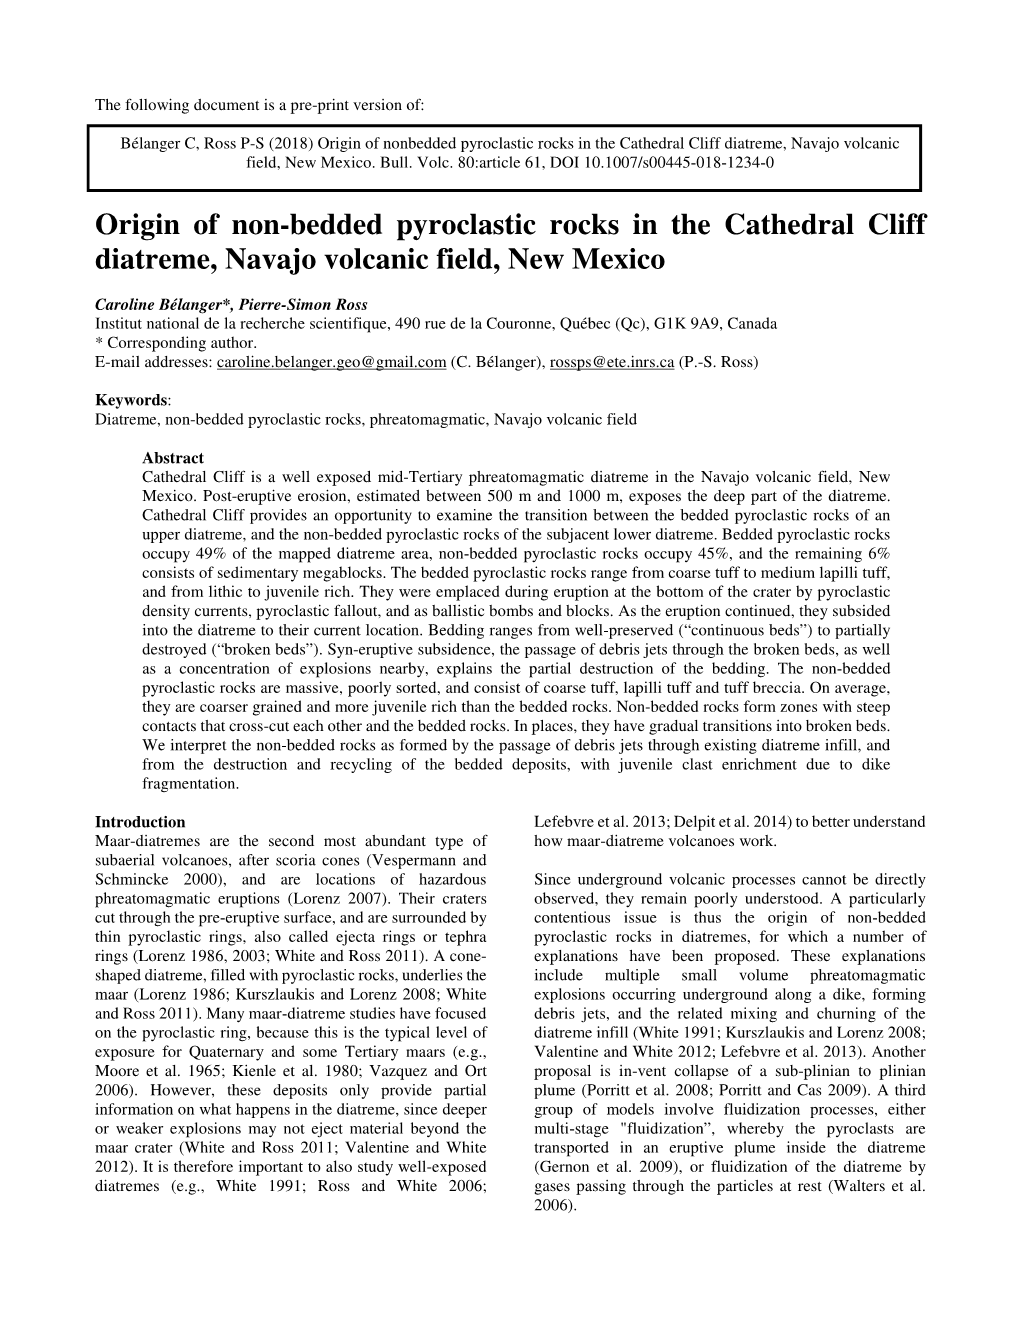 Origin of Non-Bedded Pyroclastic Rocks in the Cathedral Cliff Diatreme, Navajo Volcanic Field, New Mexico